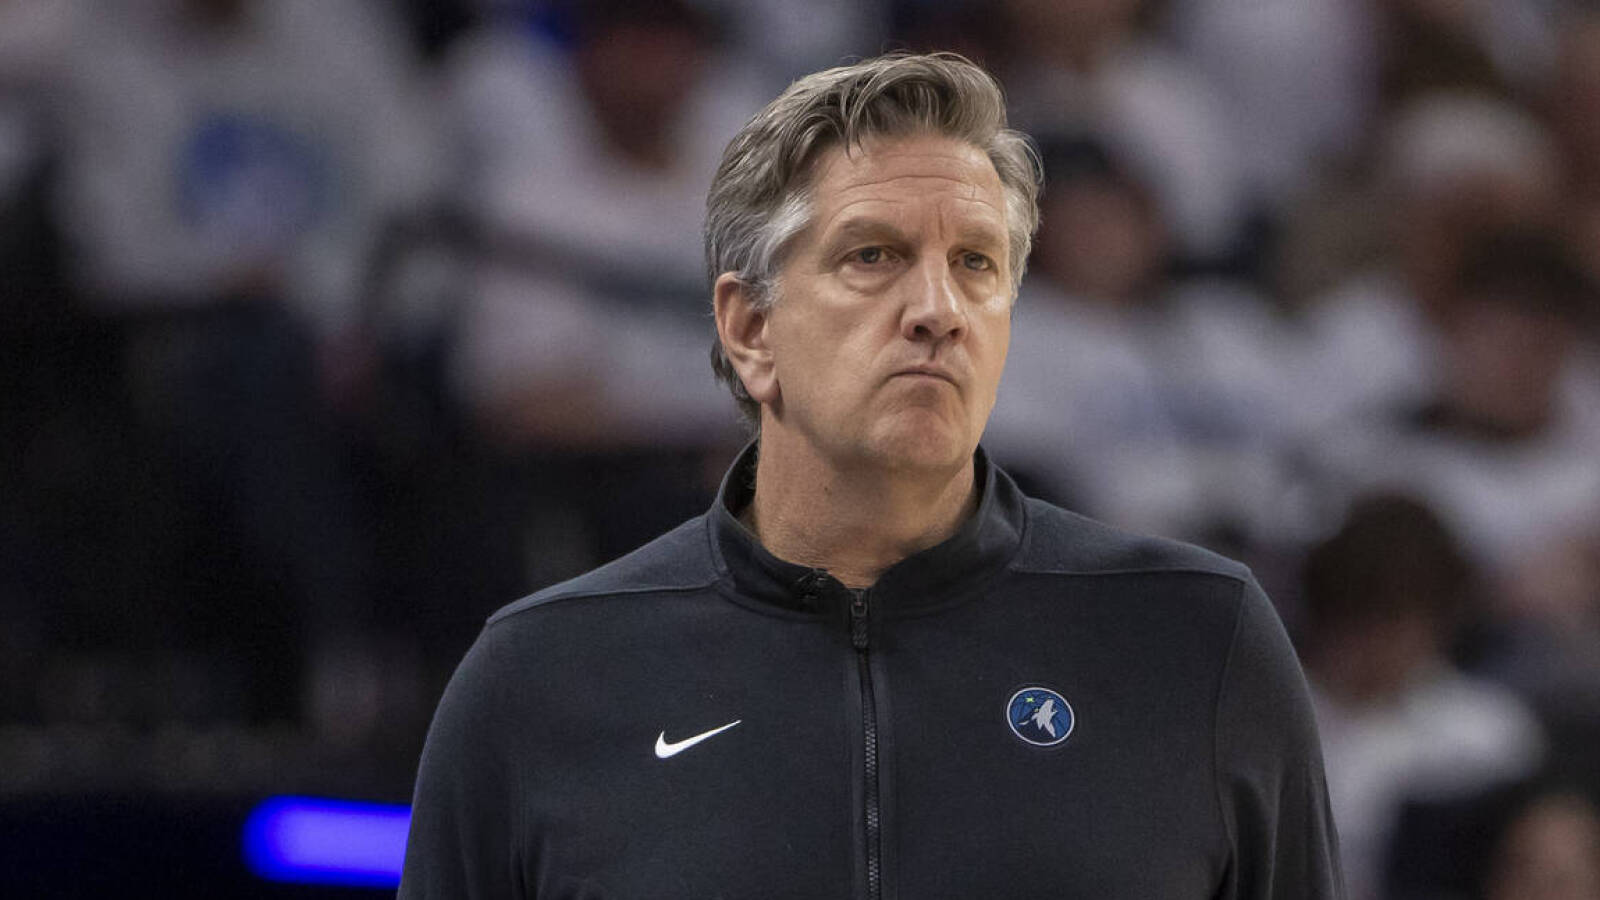 Encouraging sign emerges about Timberwolves HC Chris Finch after sideline injury